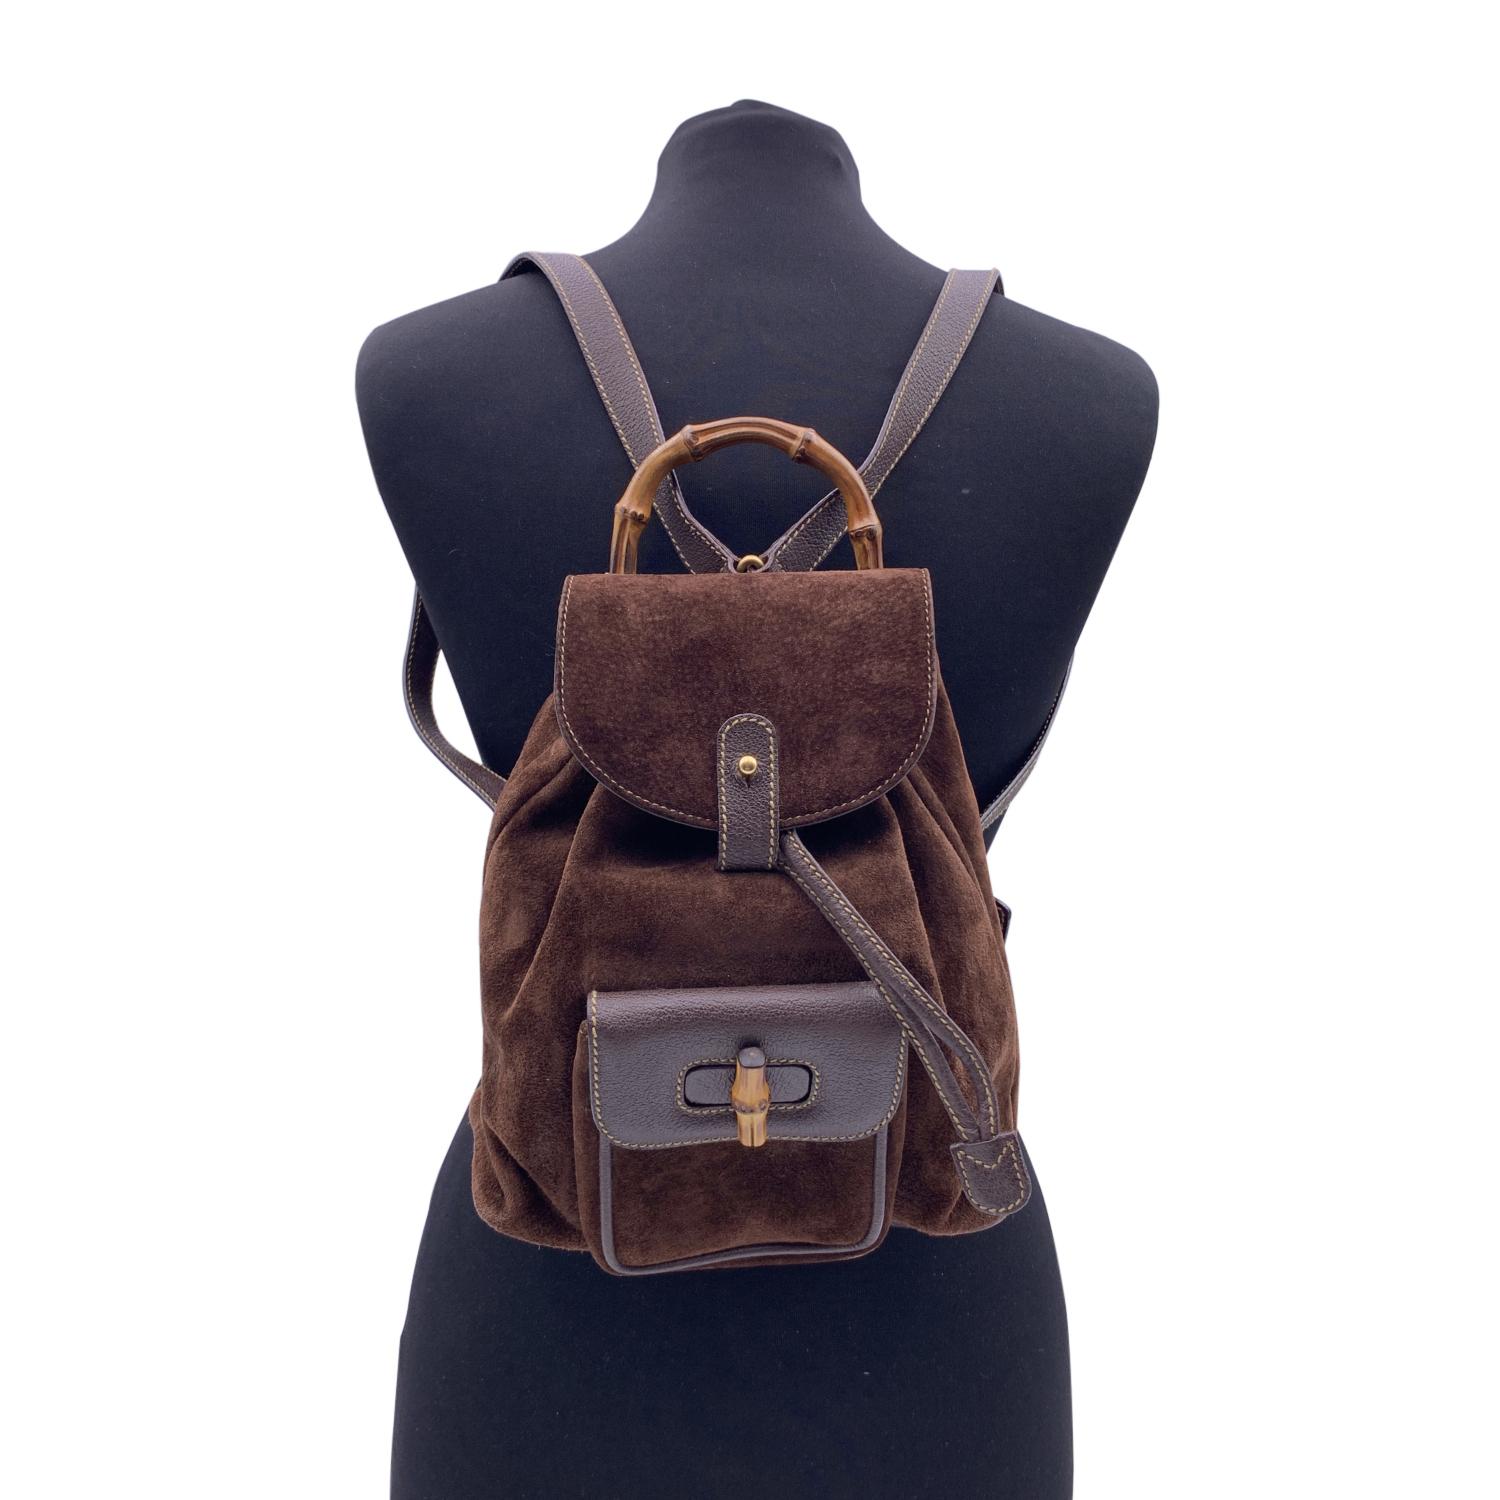 Vintage small backpack by Gucci, crafted in brown canvas and leather. It features Bamboo handle and and knob. 1 front pocket with twist lock closure. Flap closure and drawstring top opening. gold metal hardware. Internal diamond lining. 1 side zip